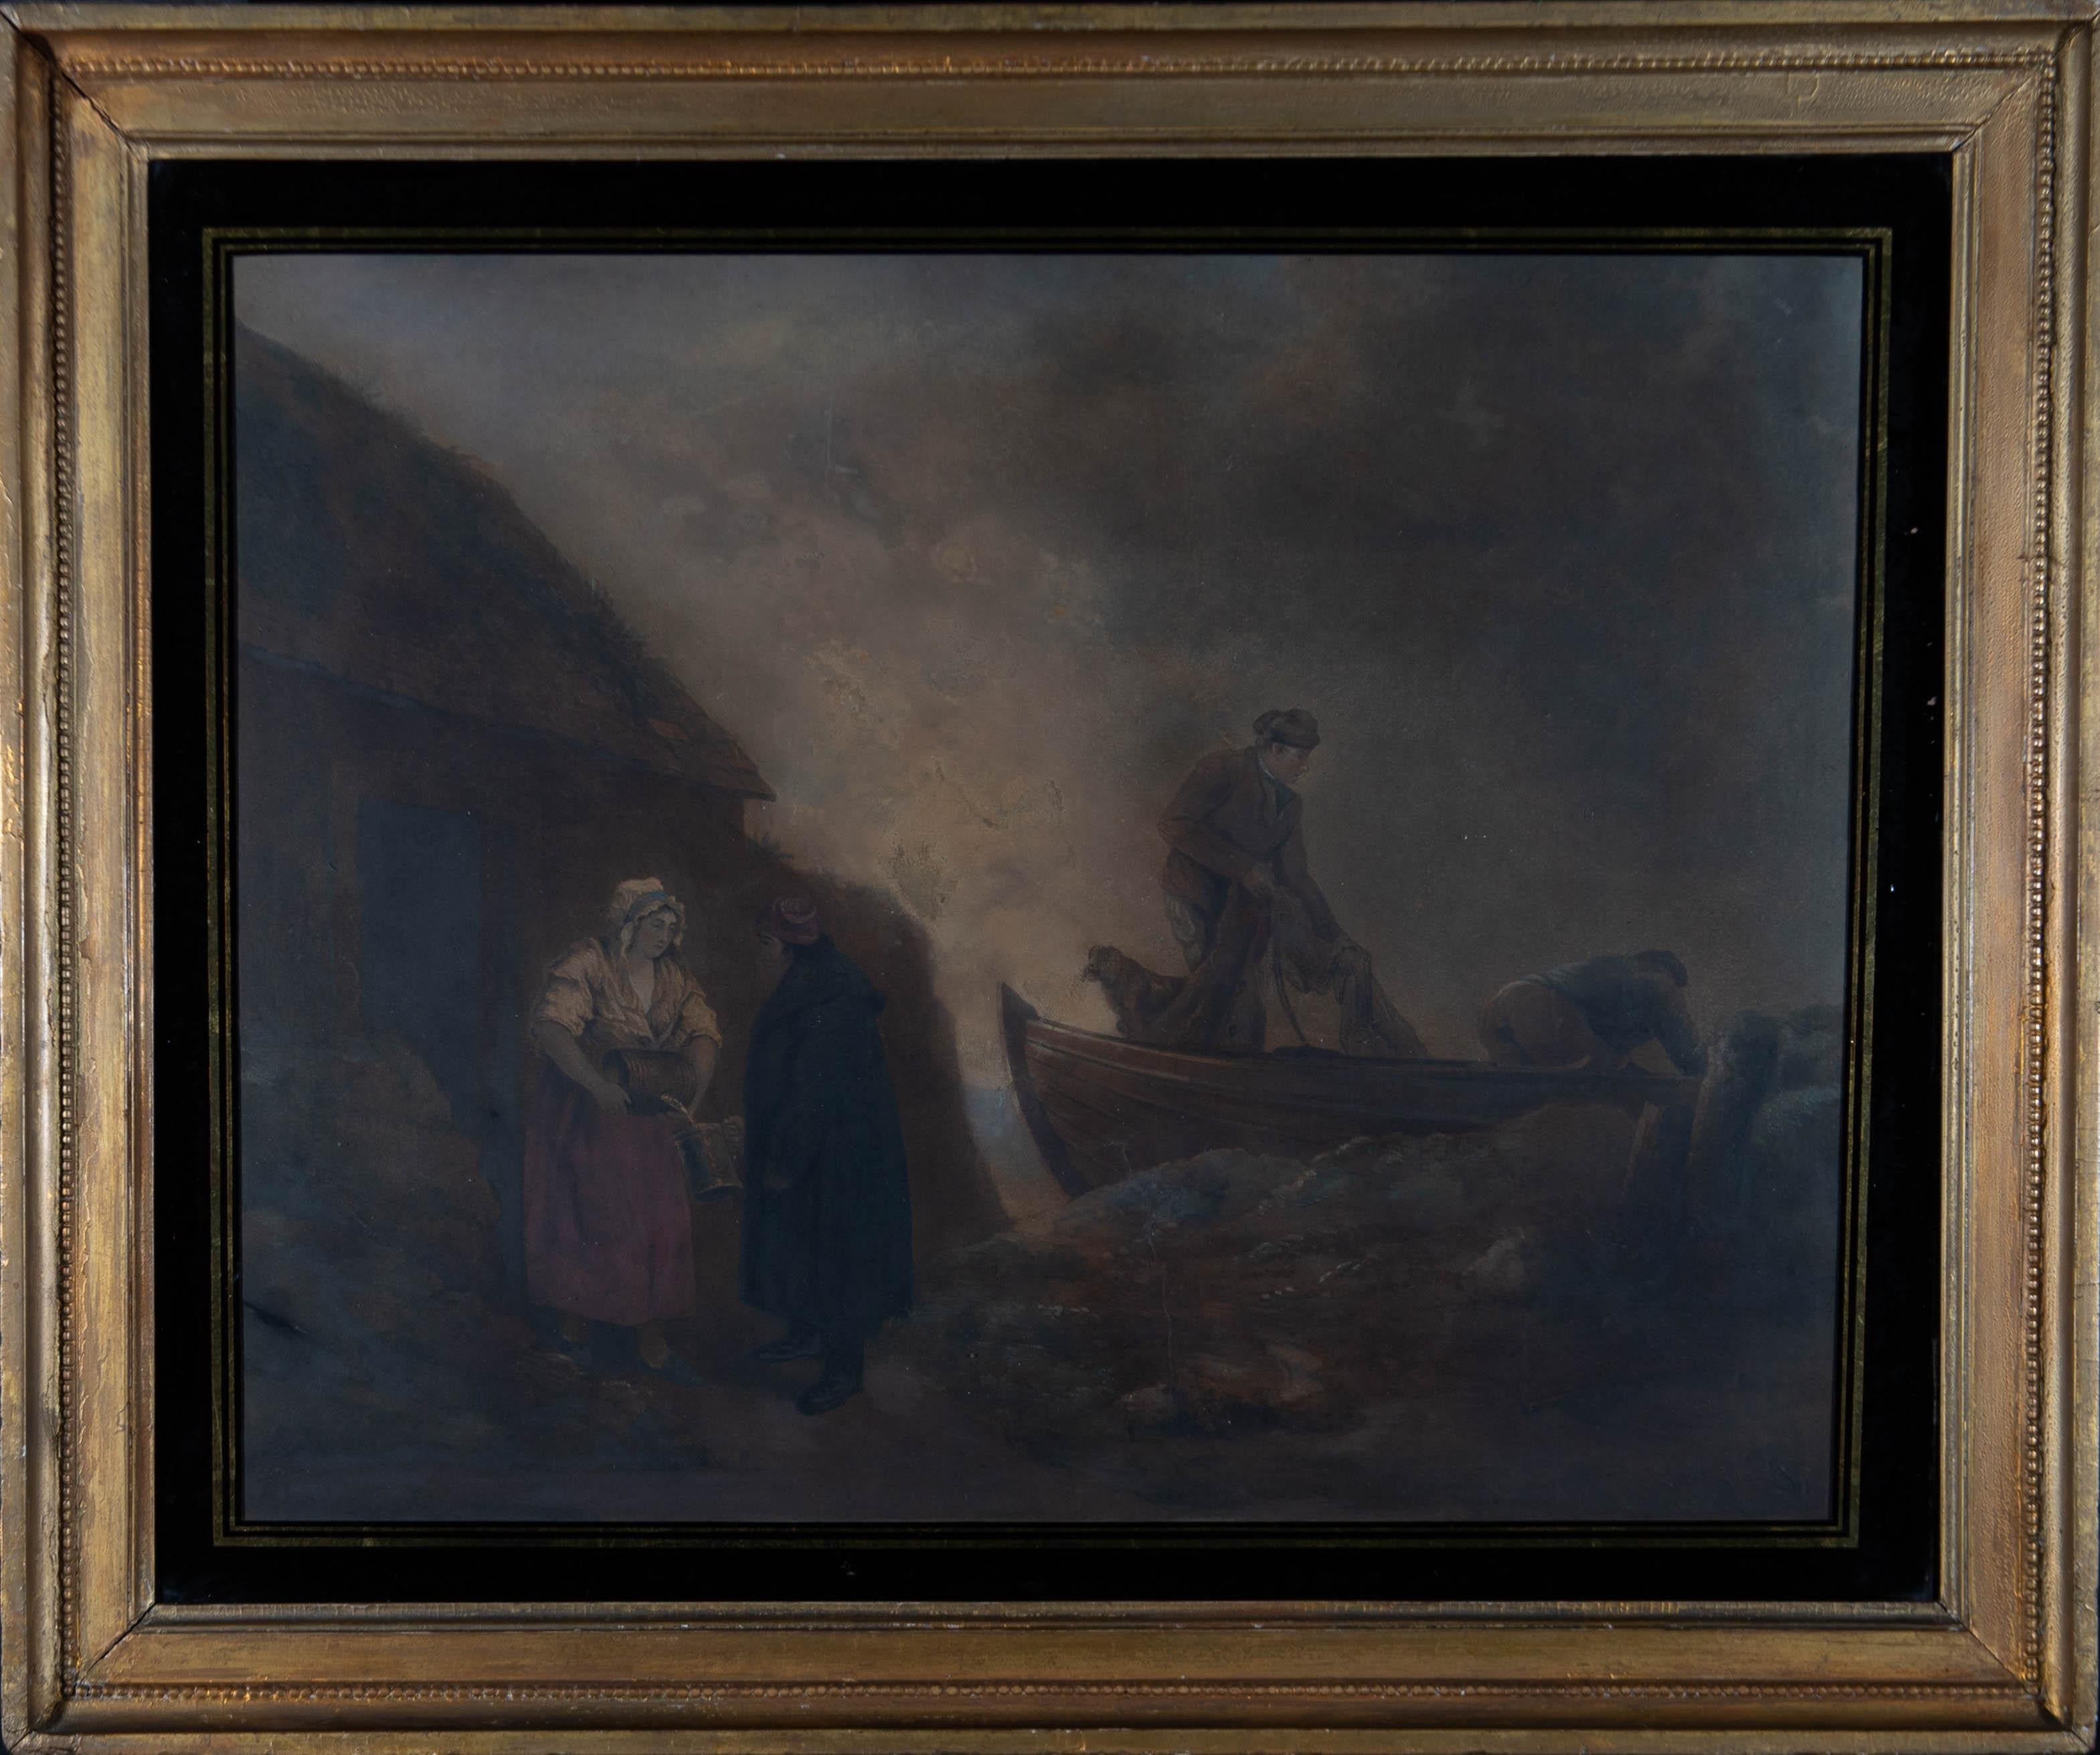 A mezzotint after George Morland (1763-1804) depicting fisherman on the coast. Presented in a verre eglomise mount and a distressed gilt-effect wooden frame. Unsigned. On wove.
